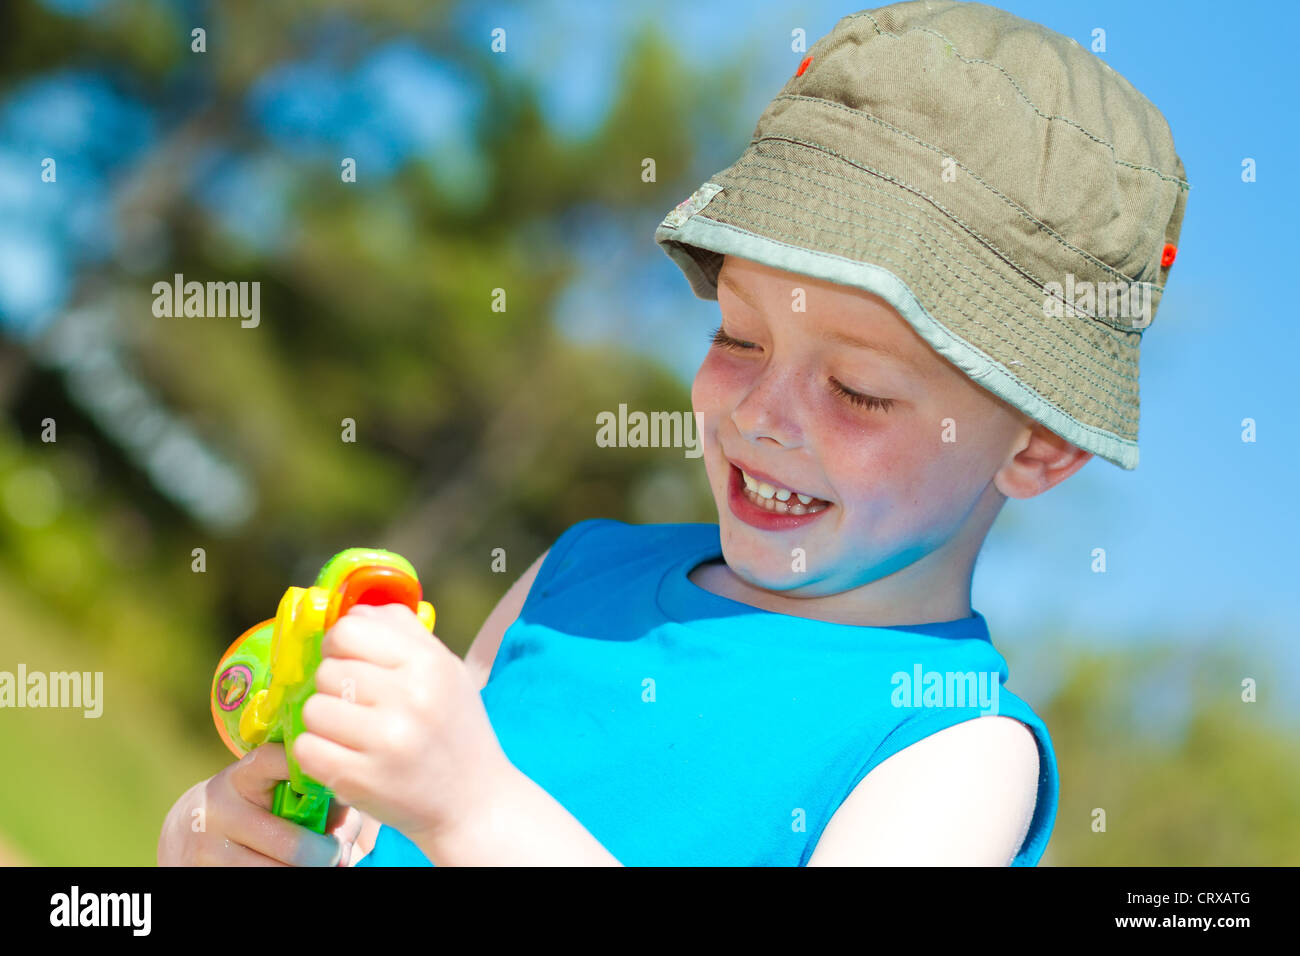 Puerto dequesa, Spain: Young boy enjoying his holiday in a popular Spanish town on the Costa del sol not far from estapona Stock Photo